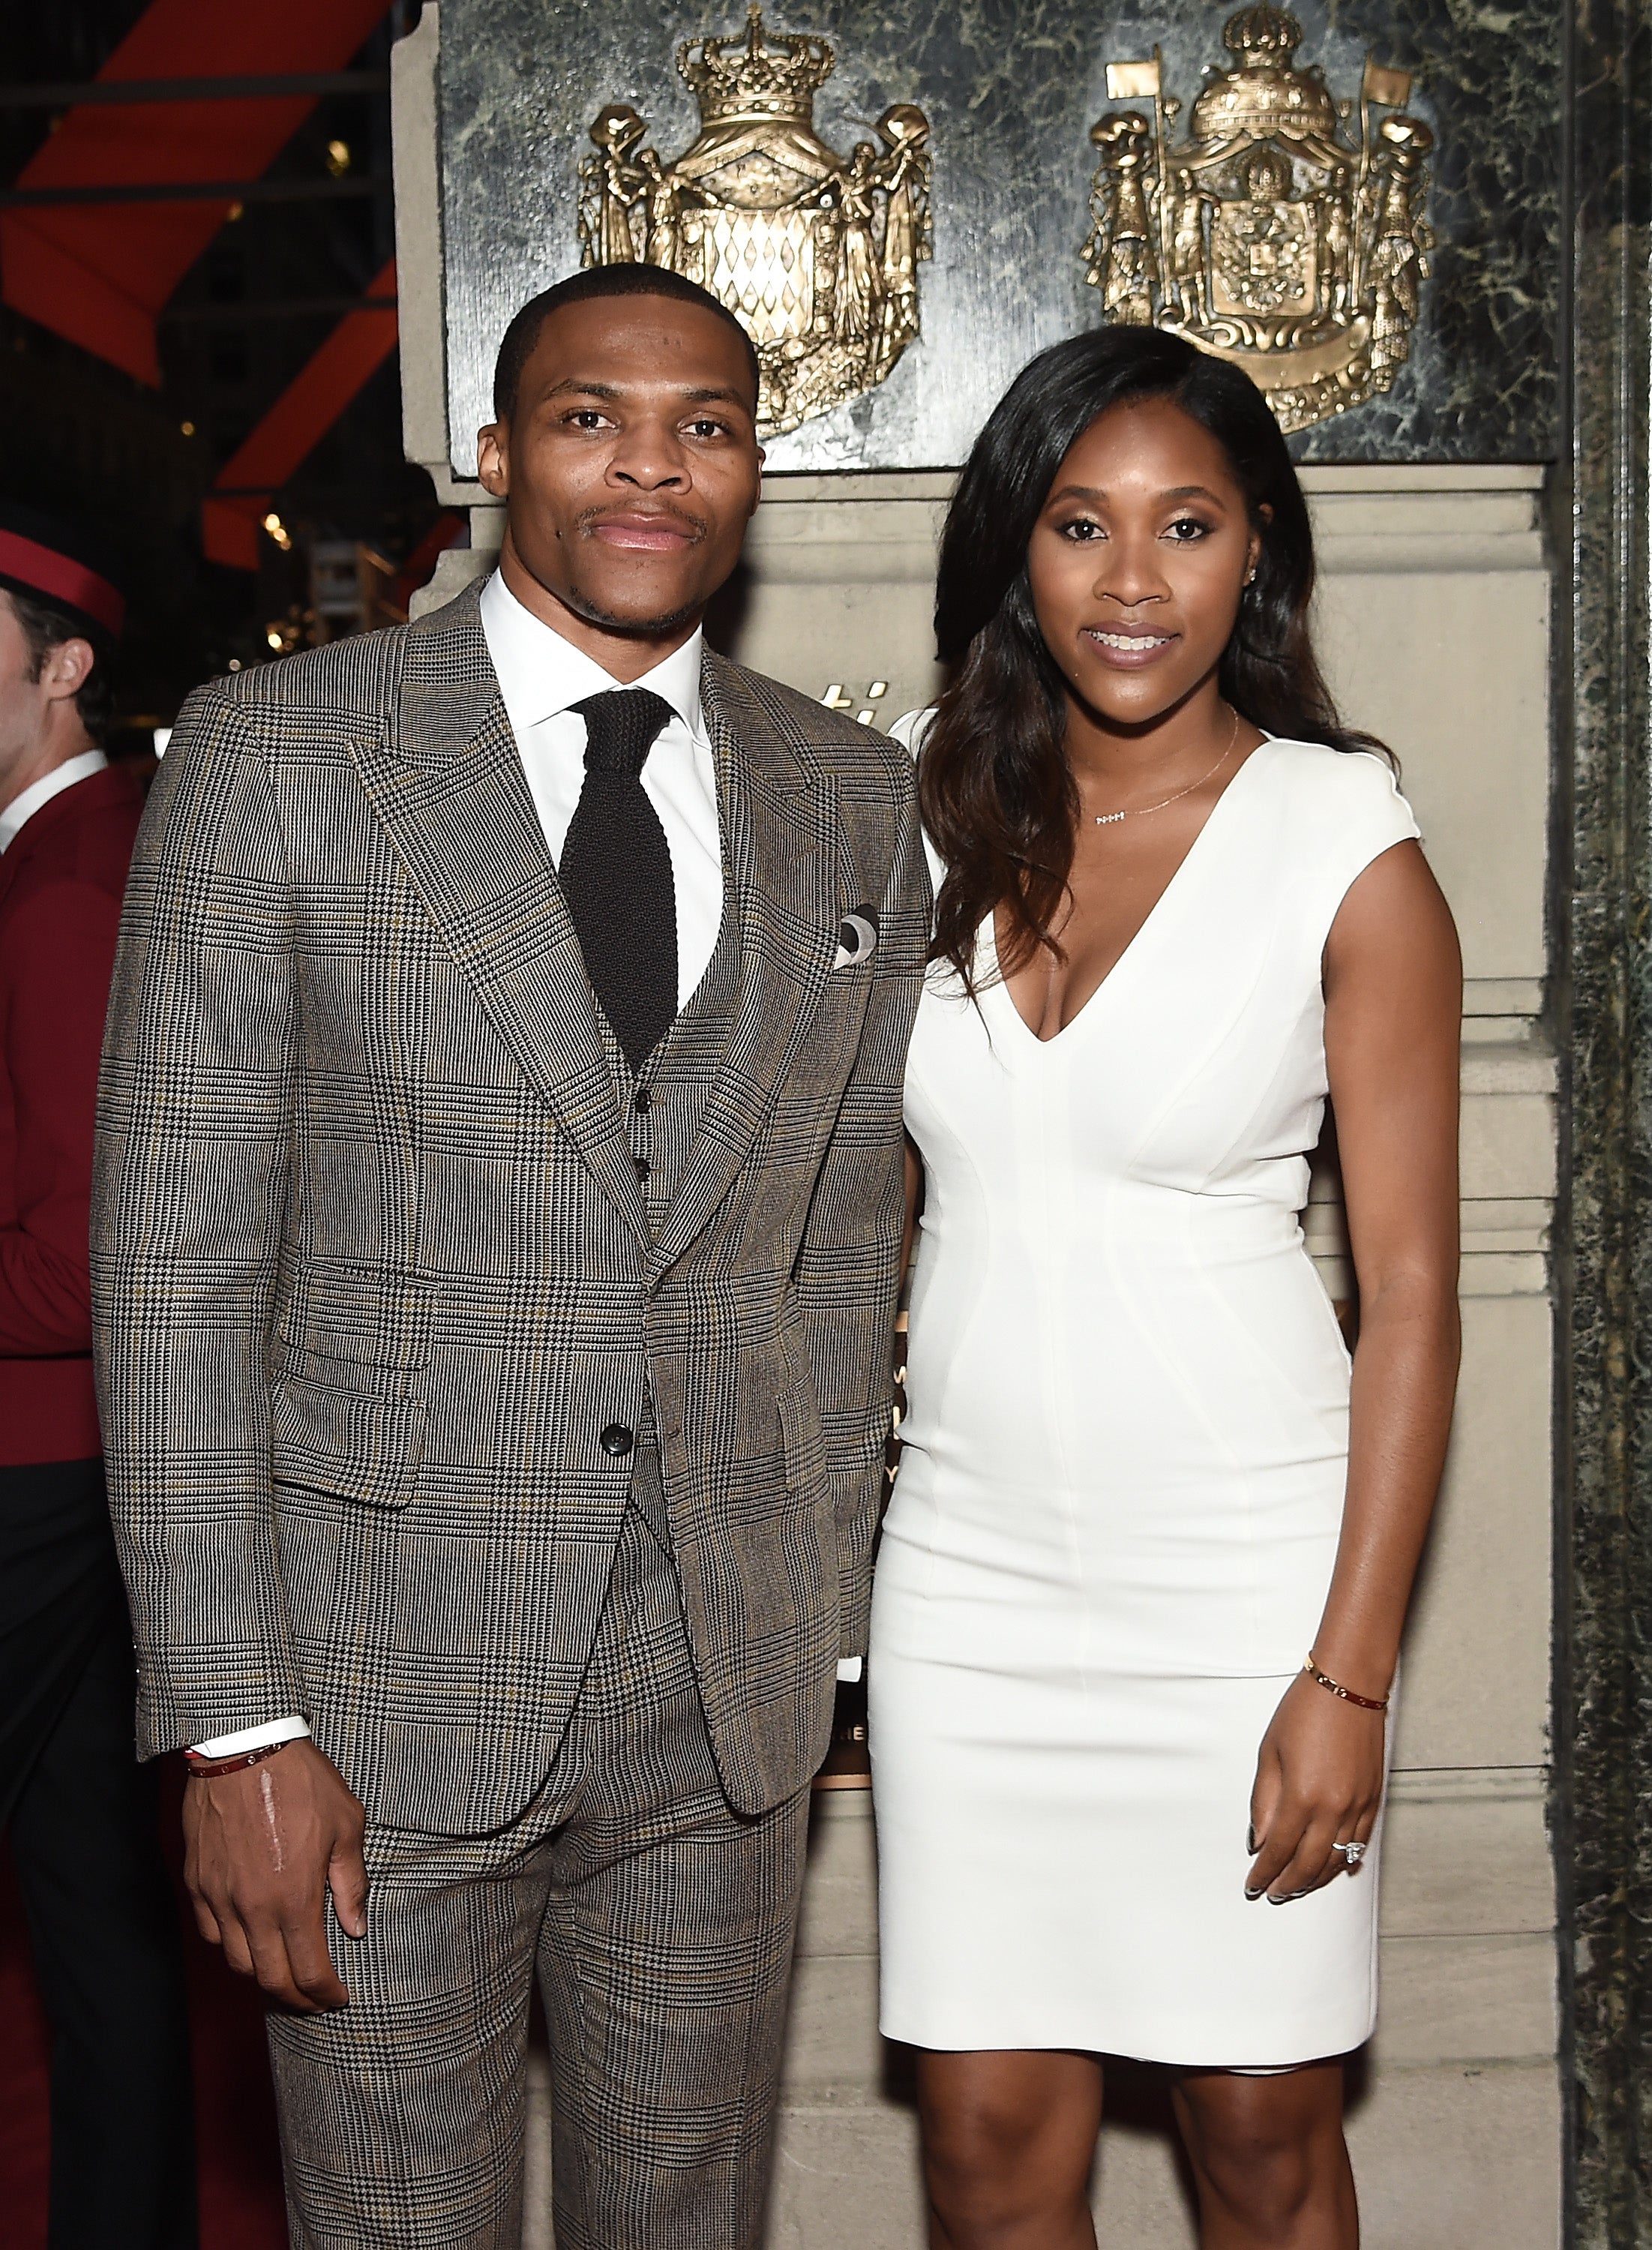 Black Love Is Beautiful! 19 Famous Couples Who Make Forever Look Easy
